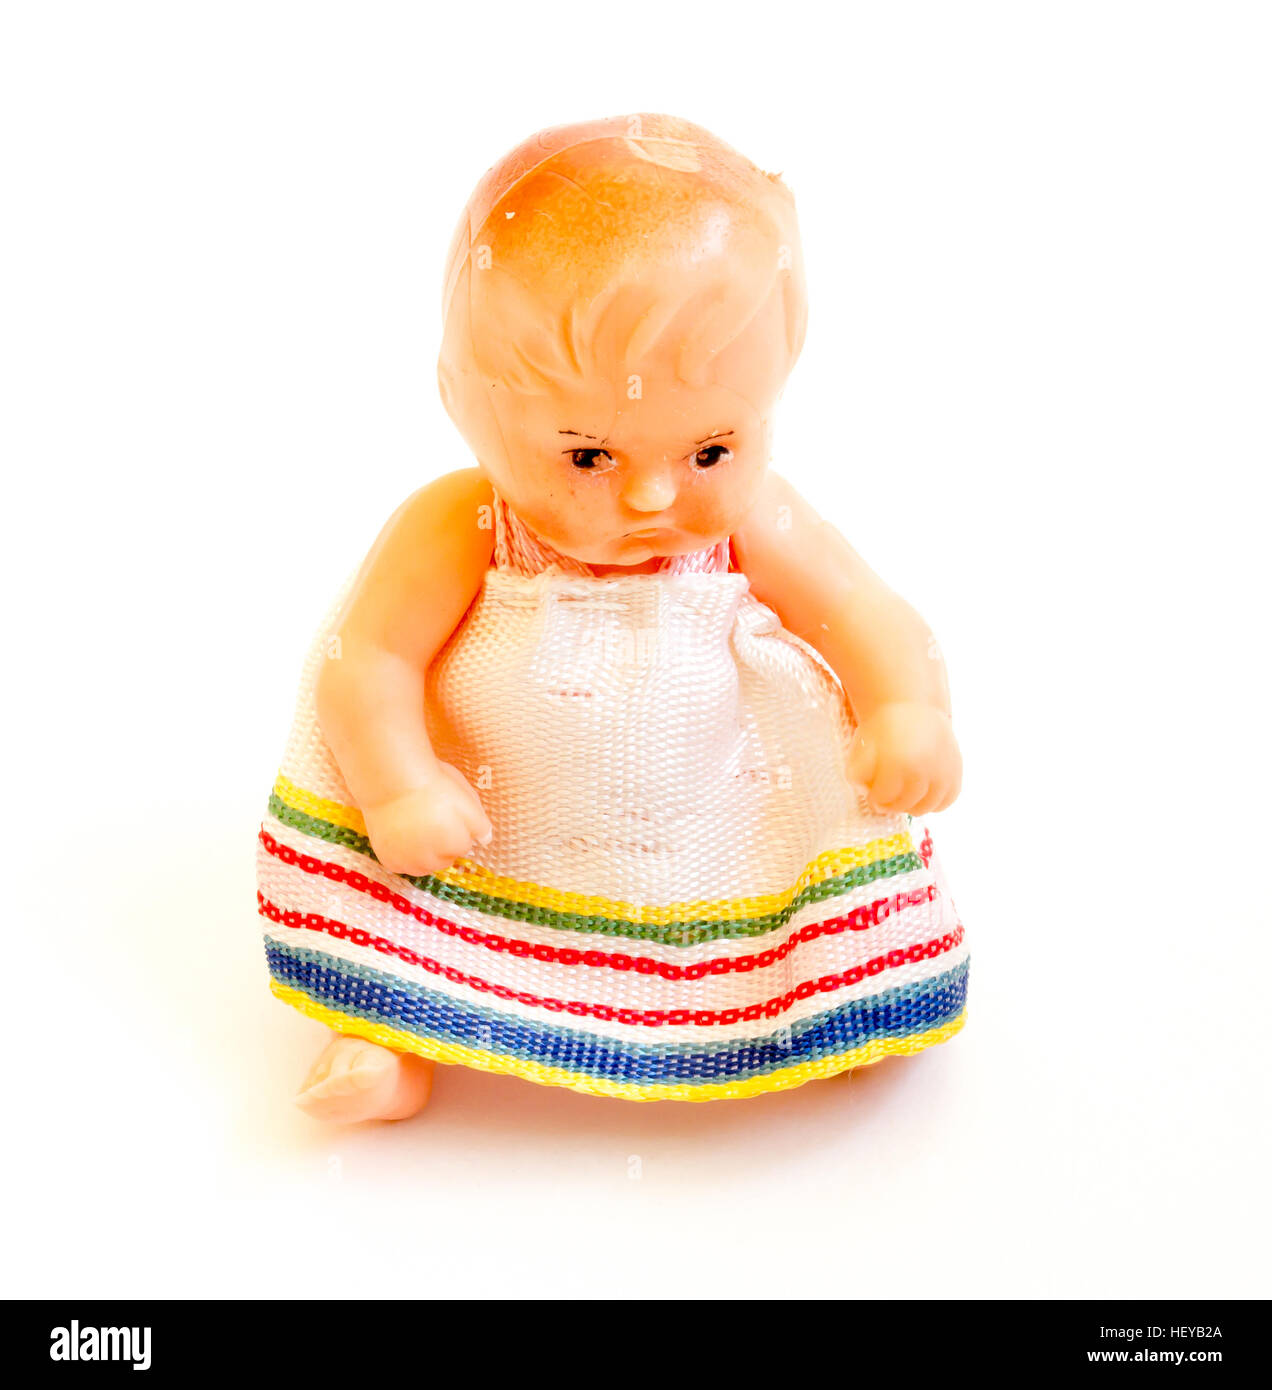 The Miniature yellow baby toy. Stock Photo